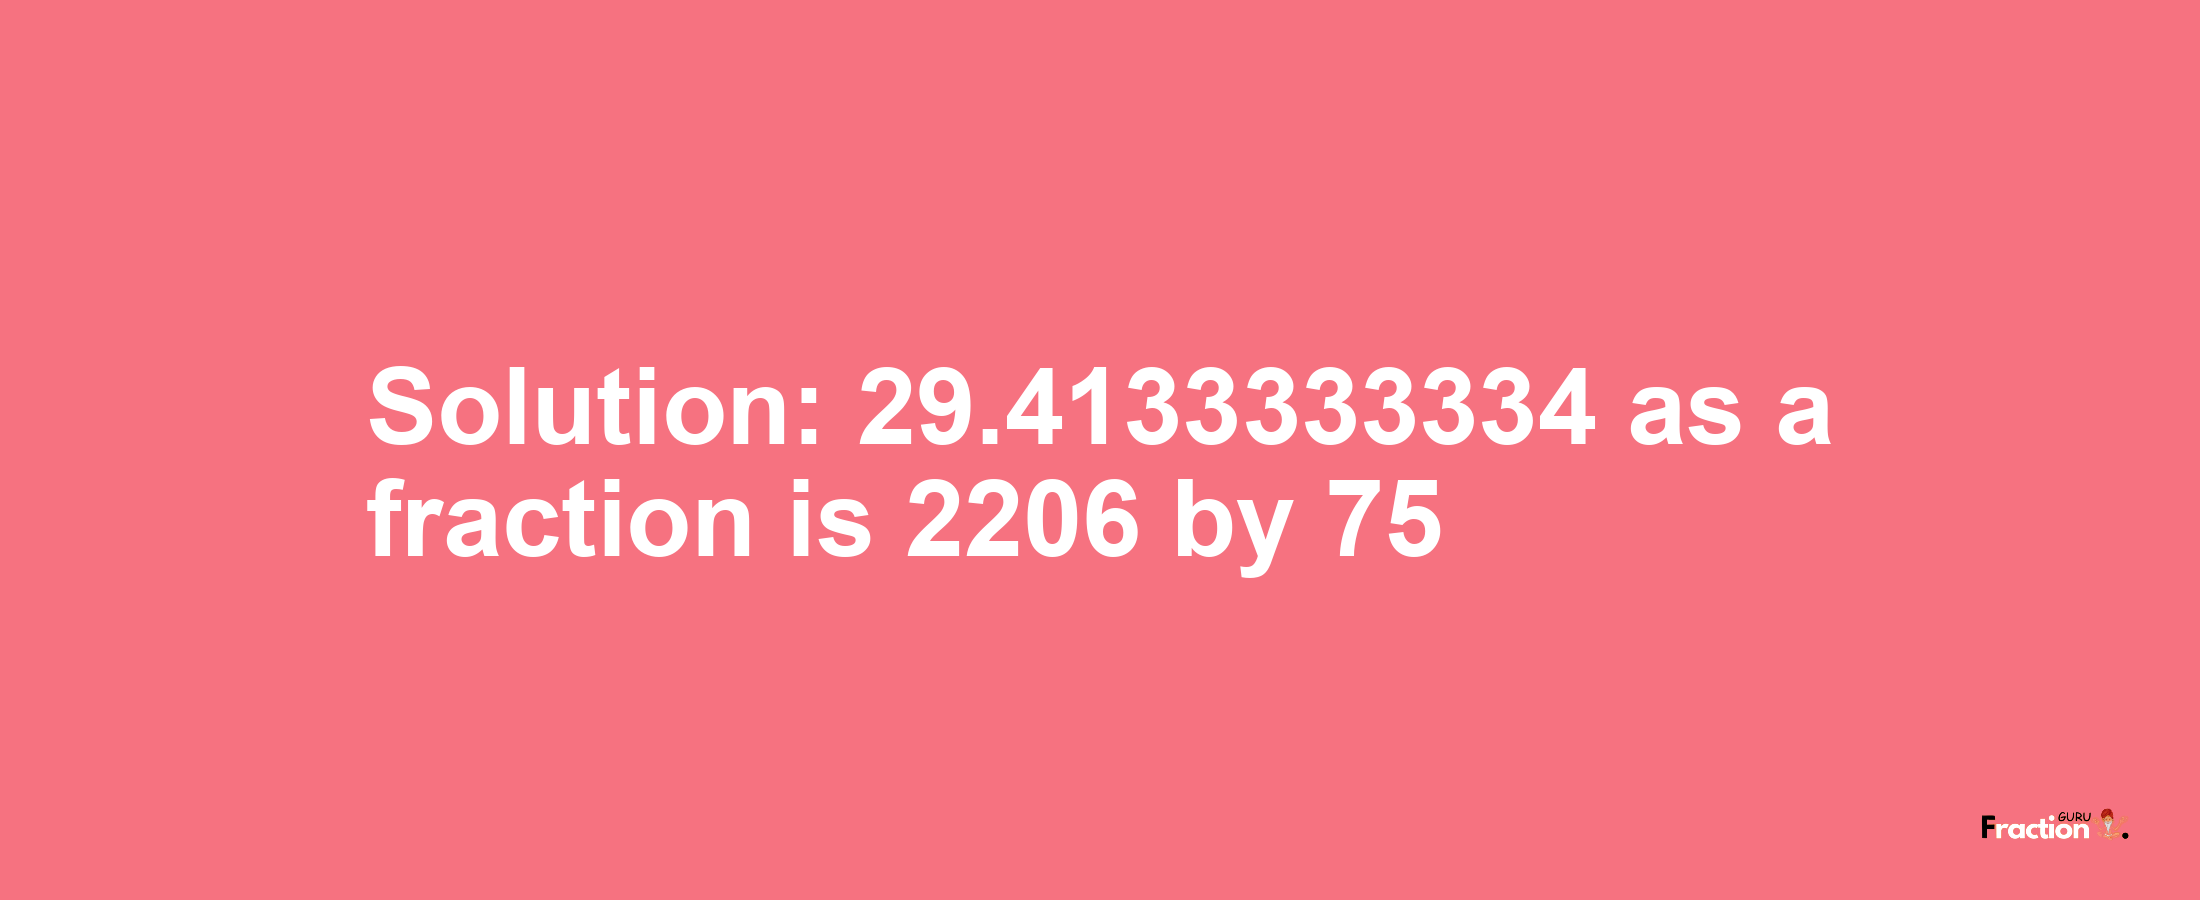 Solution:29.4133333334 as a fraction is 2206/75